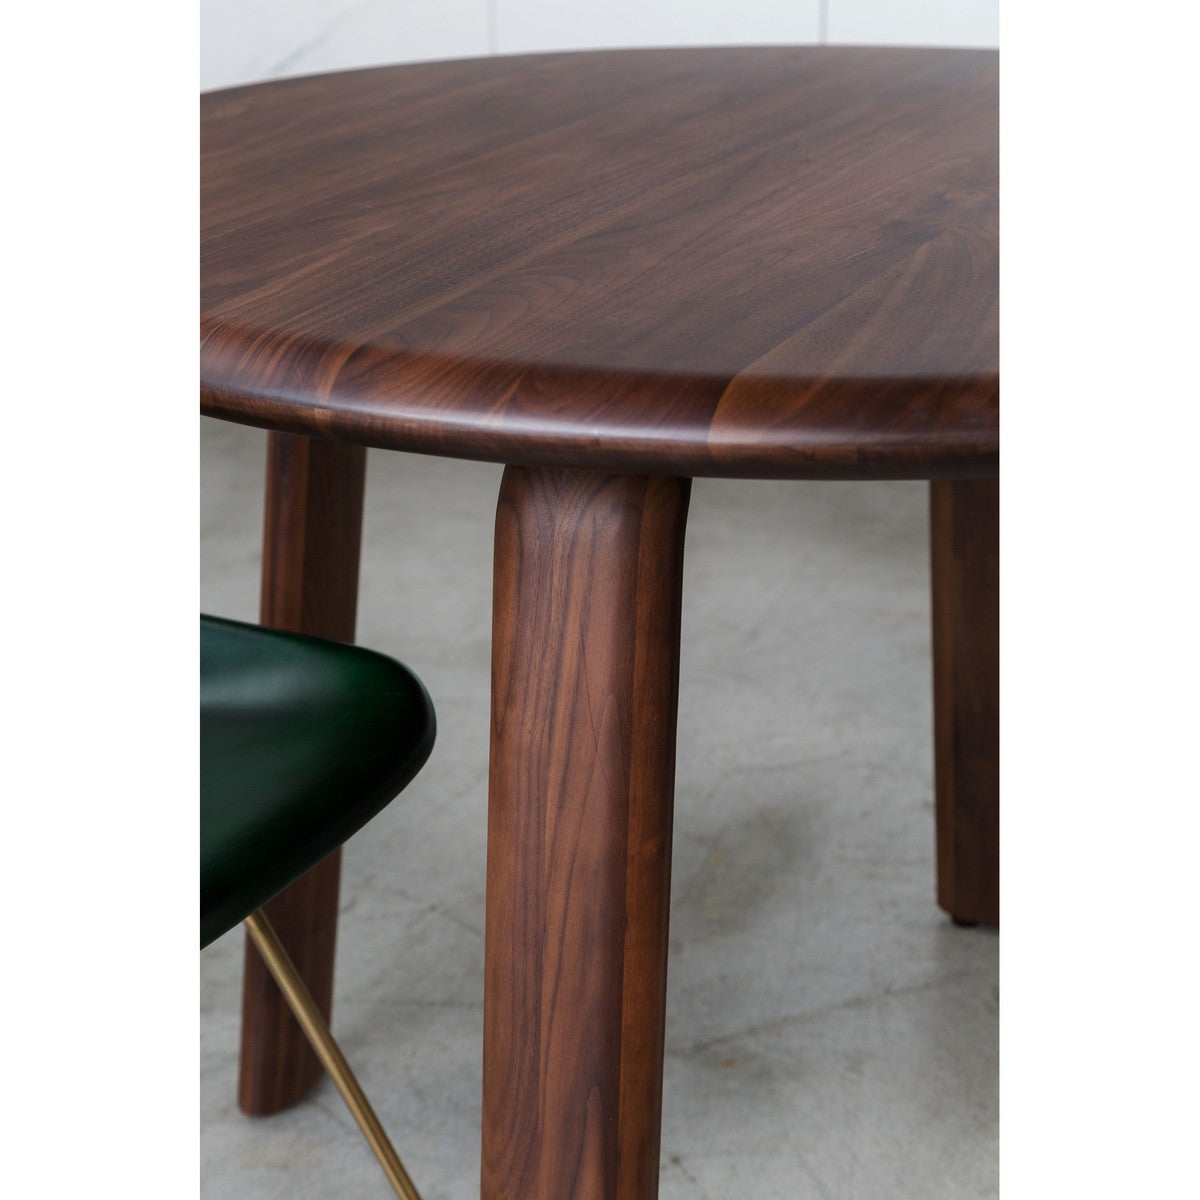 Moe's Home Collection Malibu Round Dining Table Walnut - BC-1047-03